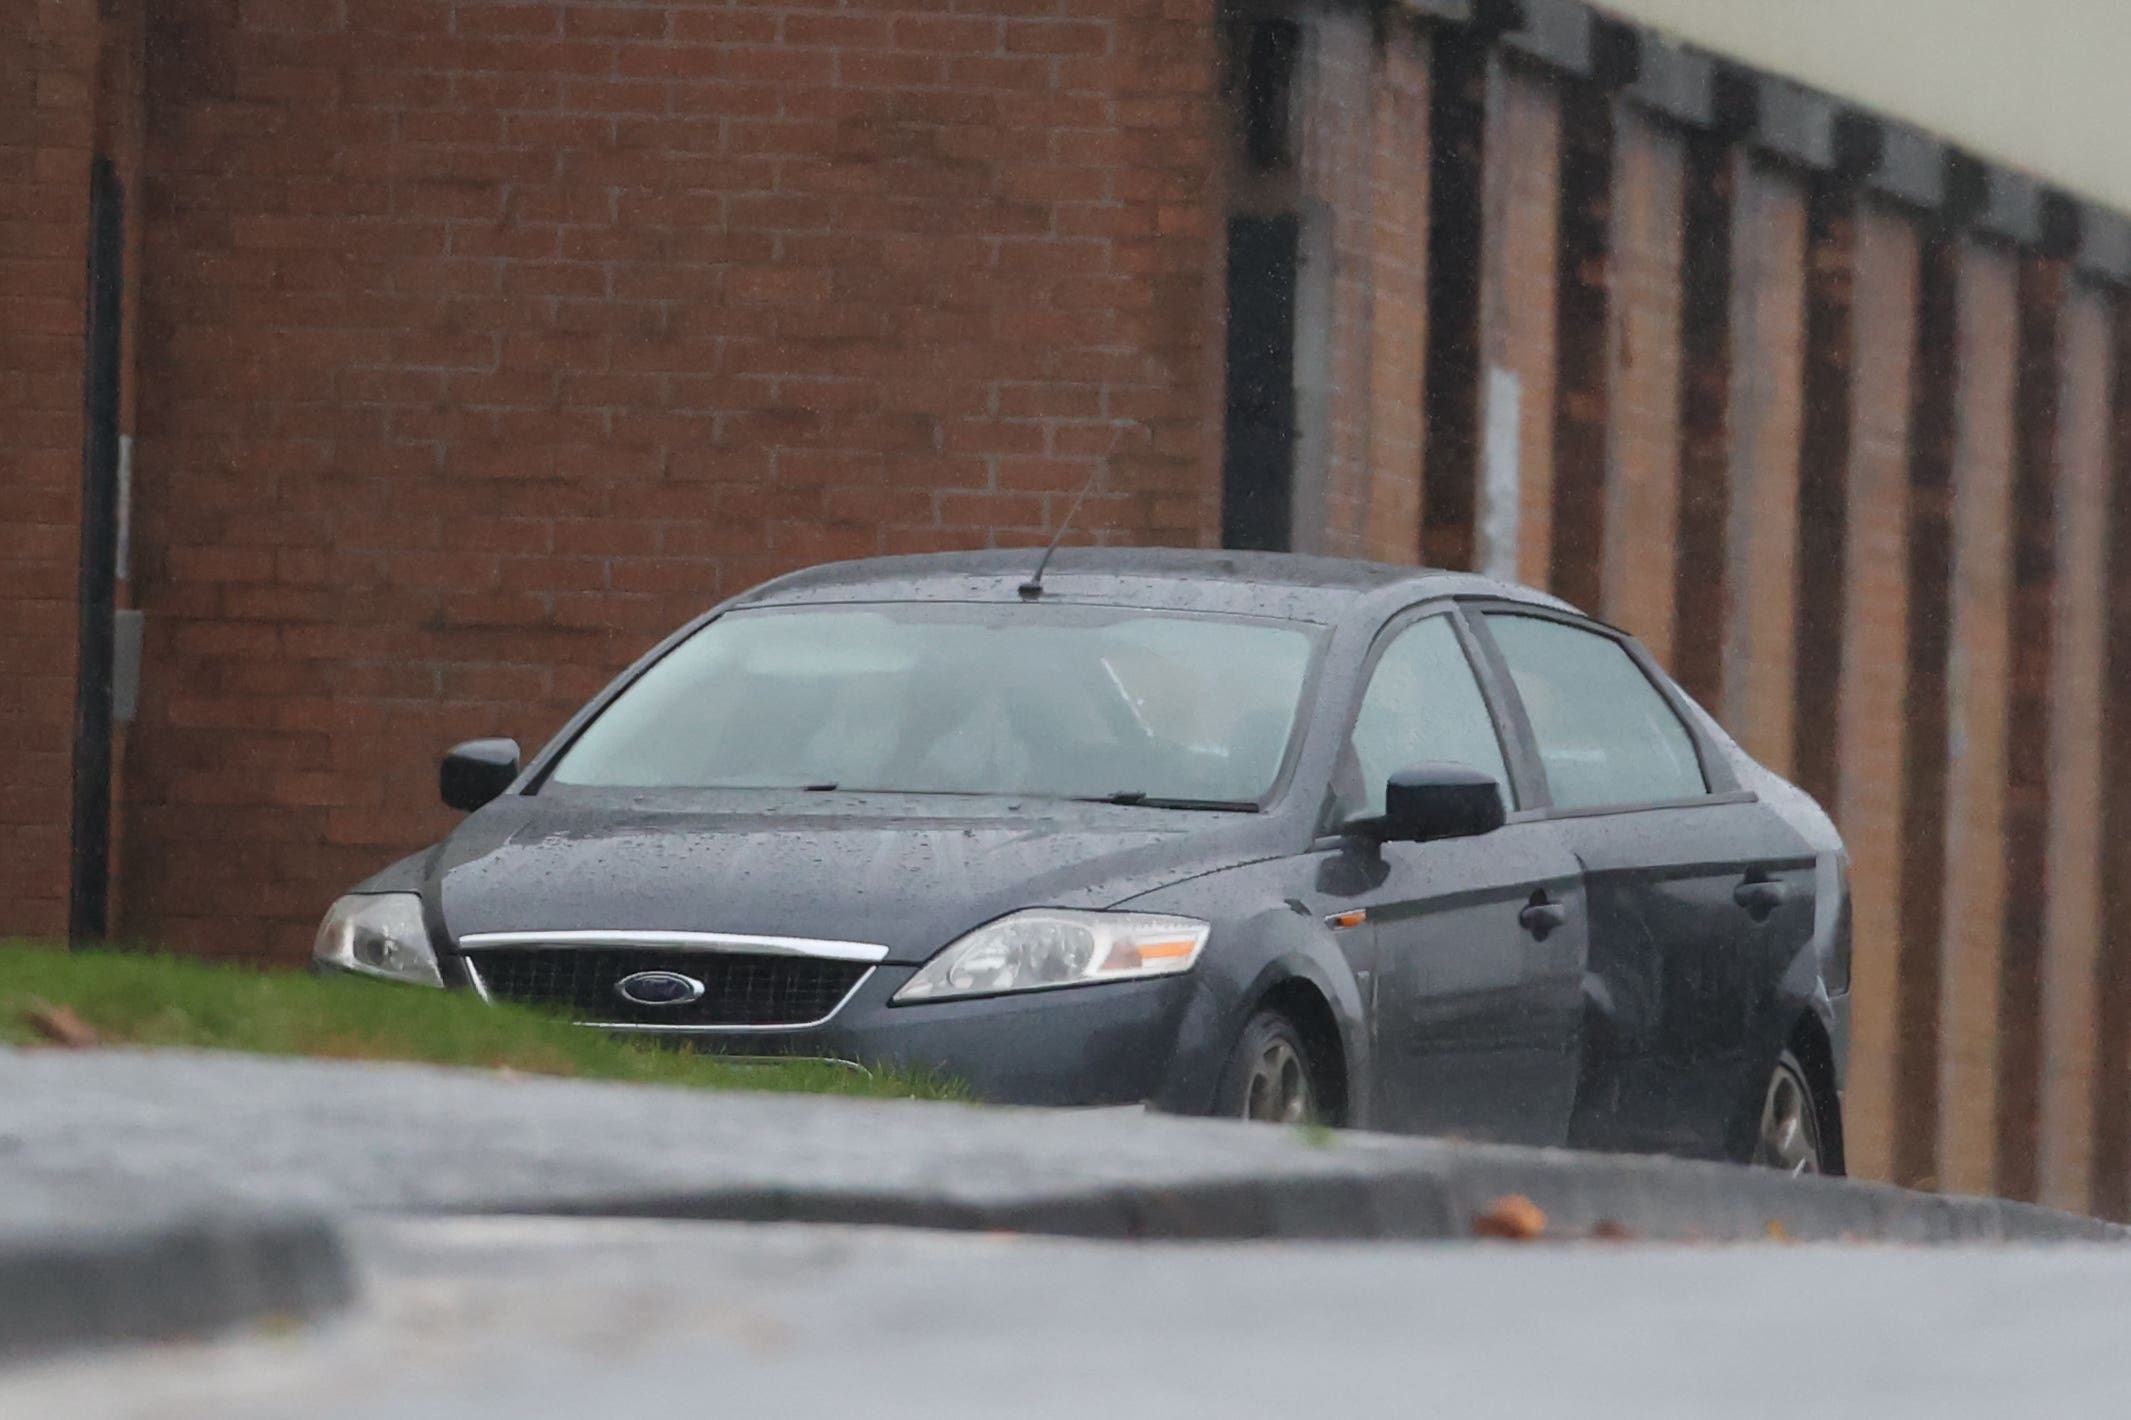 A device left in a hijacked vehicle outside a police station in Londonderry on Sunday was a viable bomb, officers have confirmed (Liam McBurney/PA)